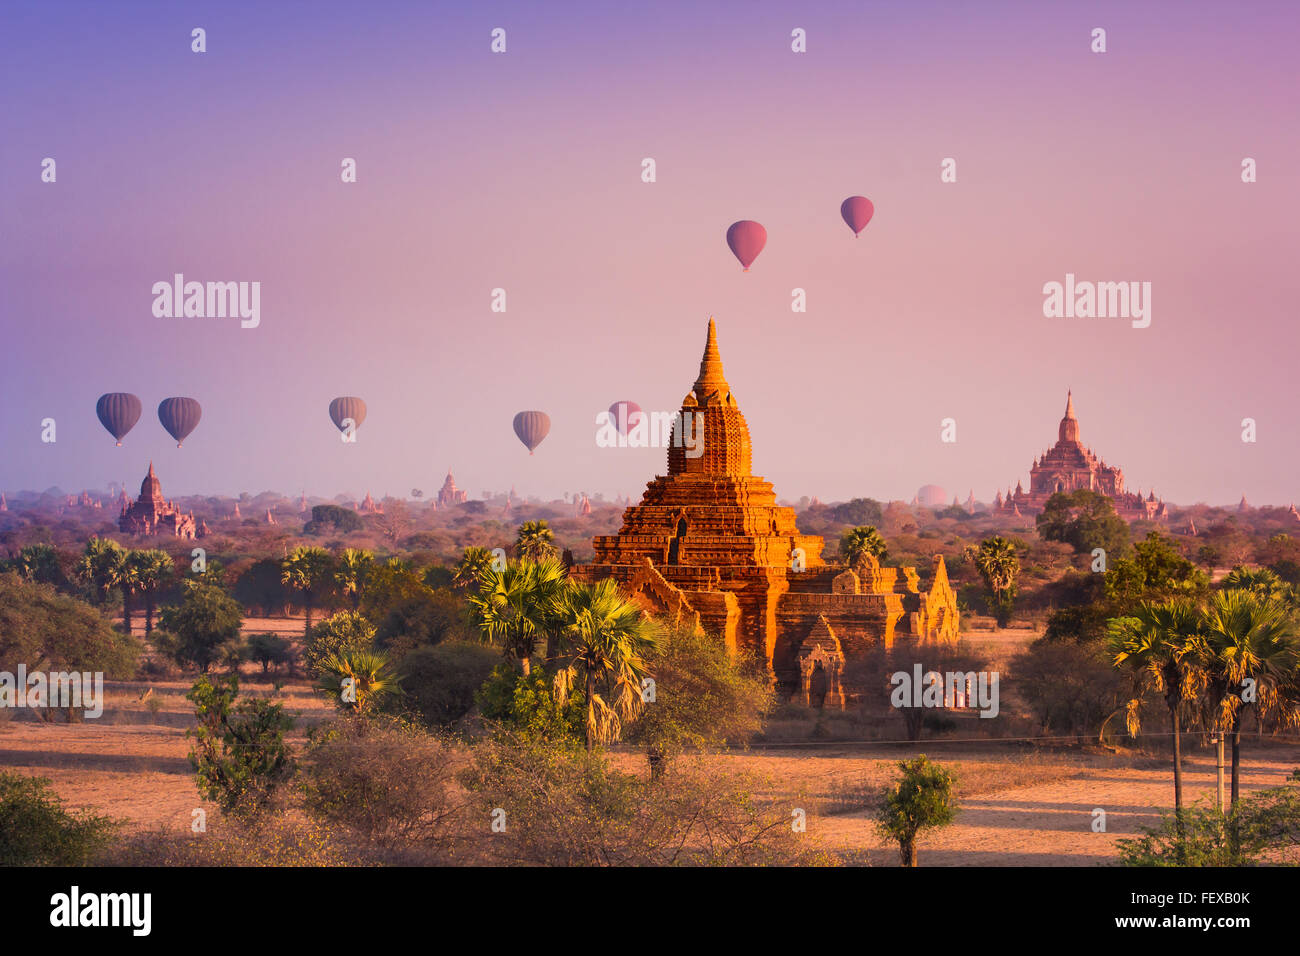 Hot air balloon over misty morning around Temple in Bagan , Myanmar Stock Photo